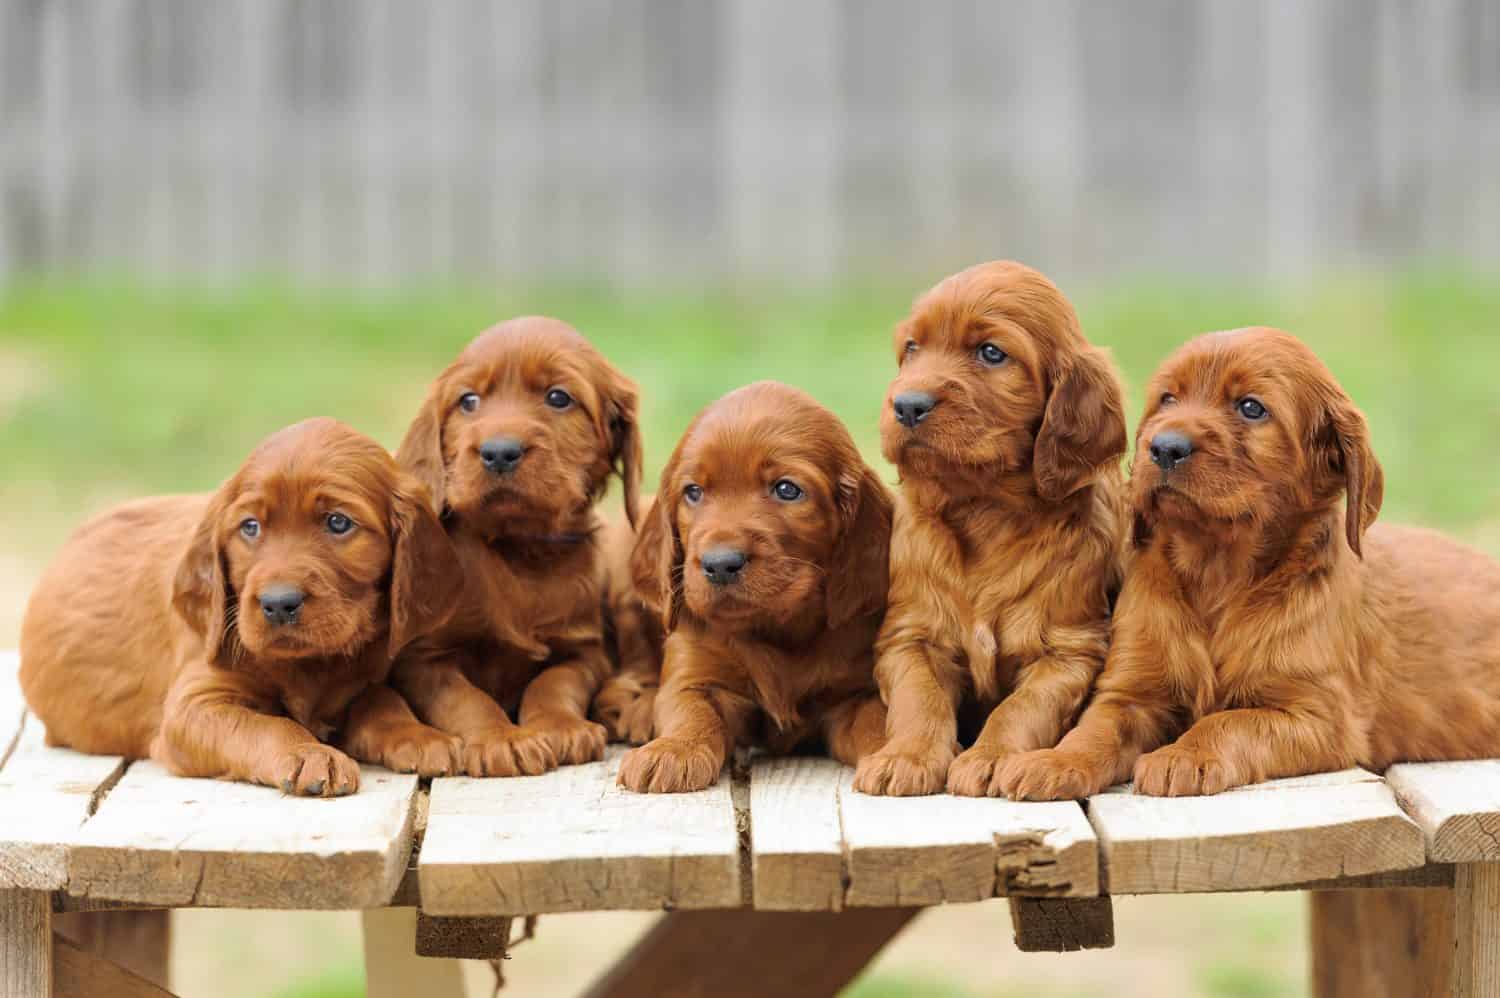 Five red setter puppies lie on wooden table, outdoors, horizontal